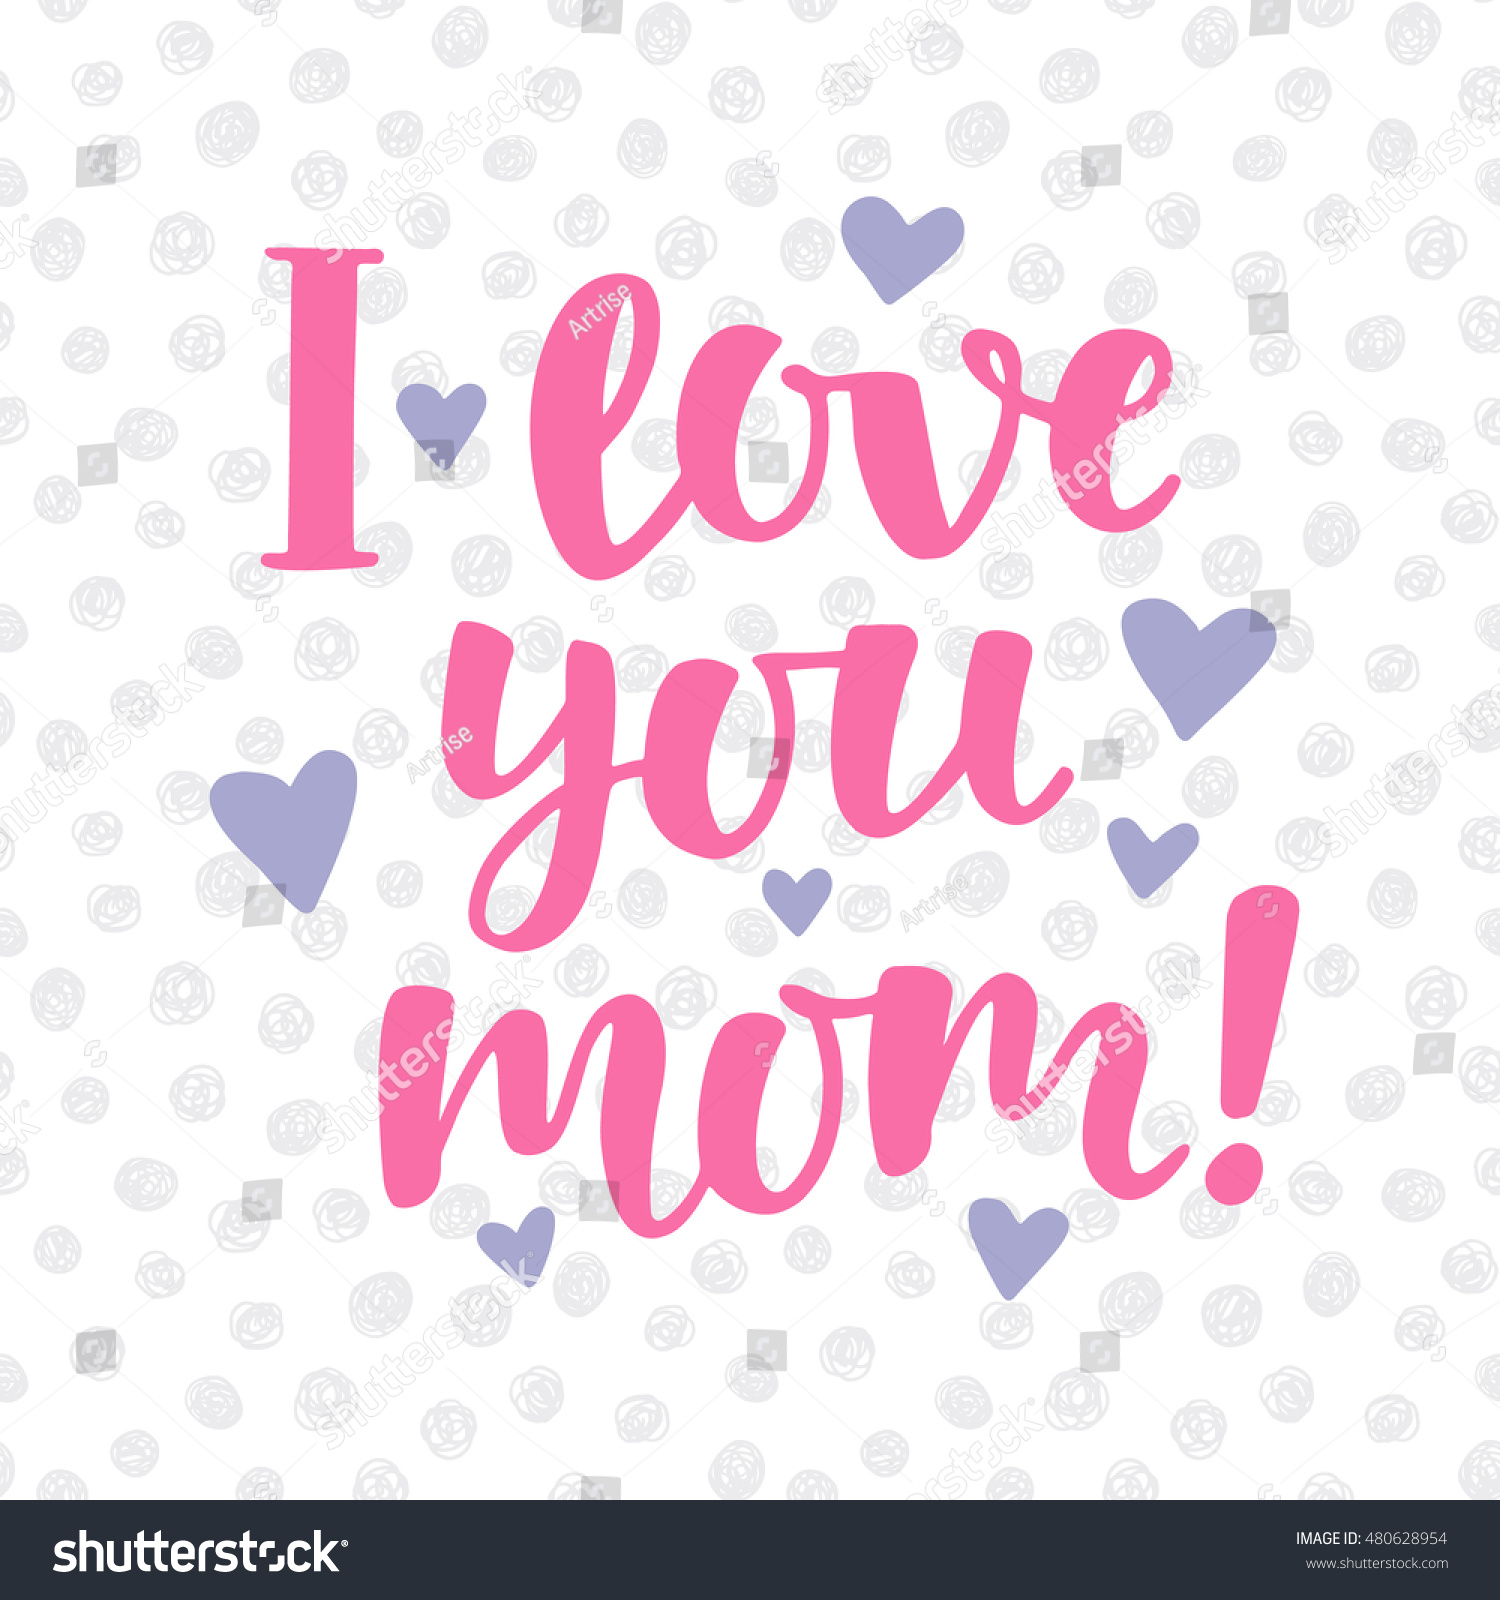 Download I Love You Mom Poster Cute Stock Vector 480628954 ...